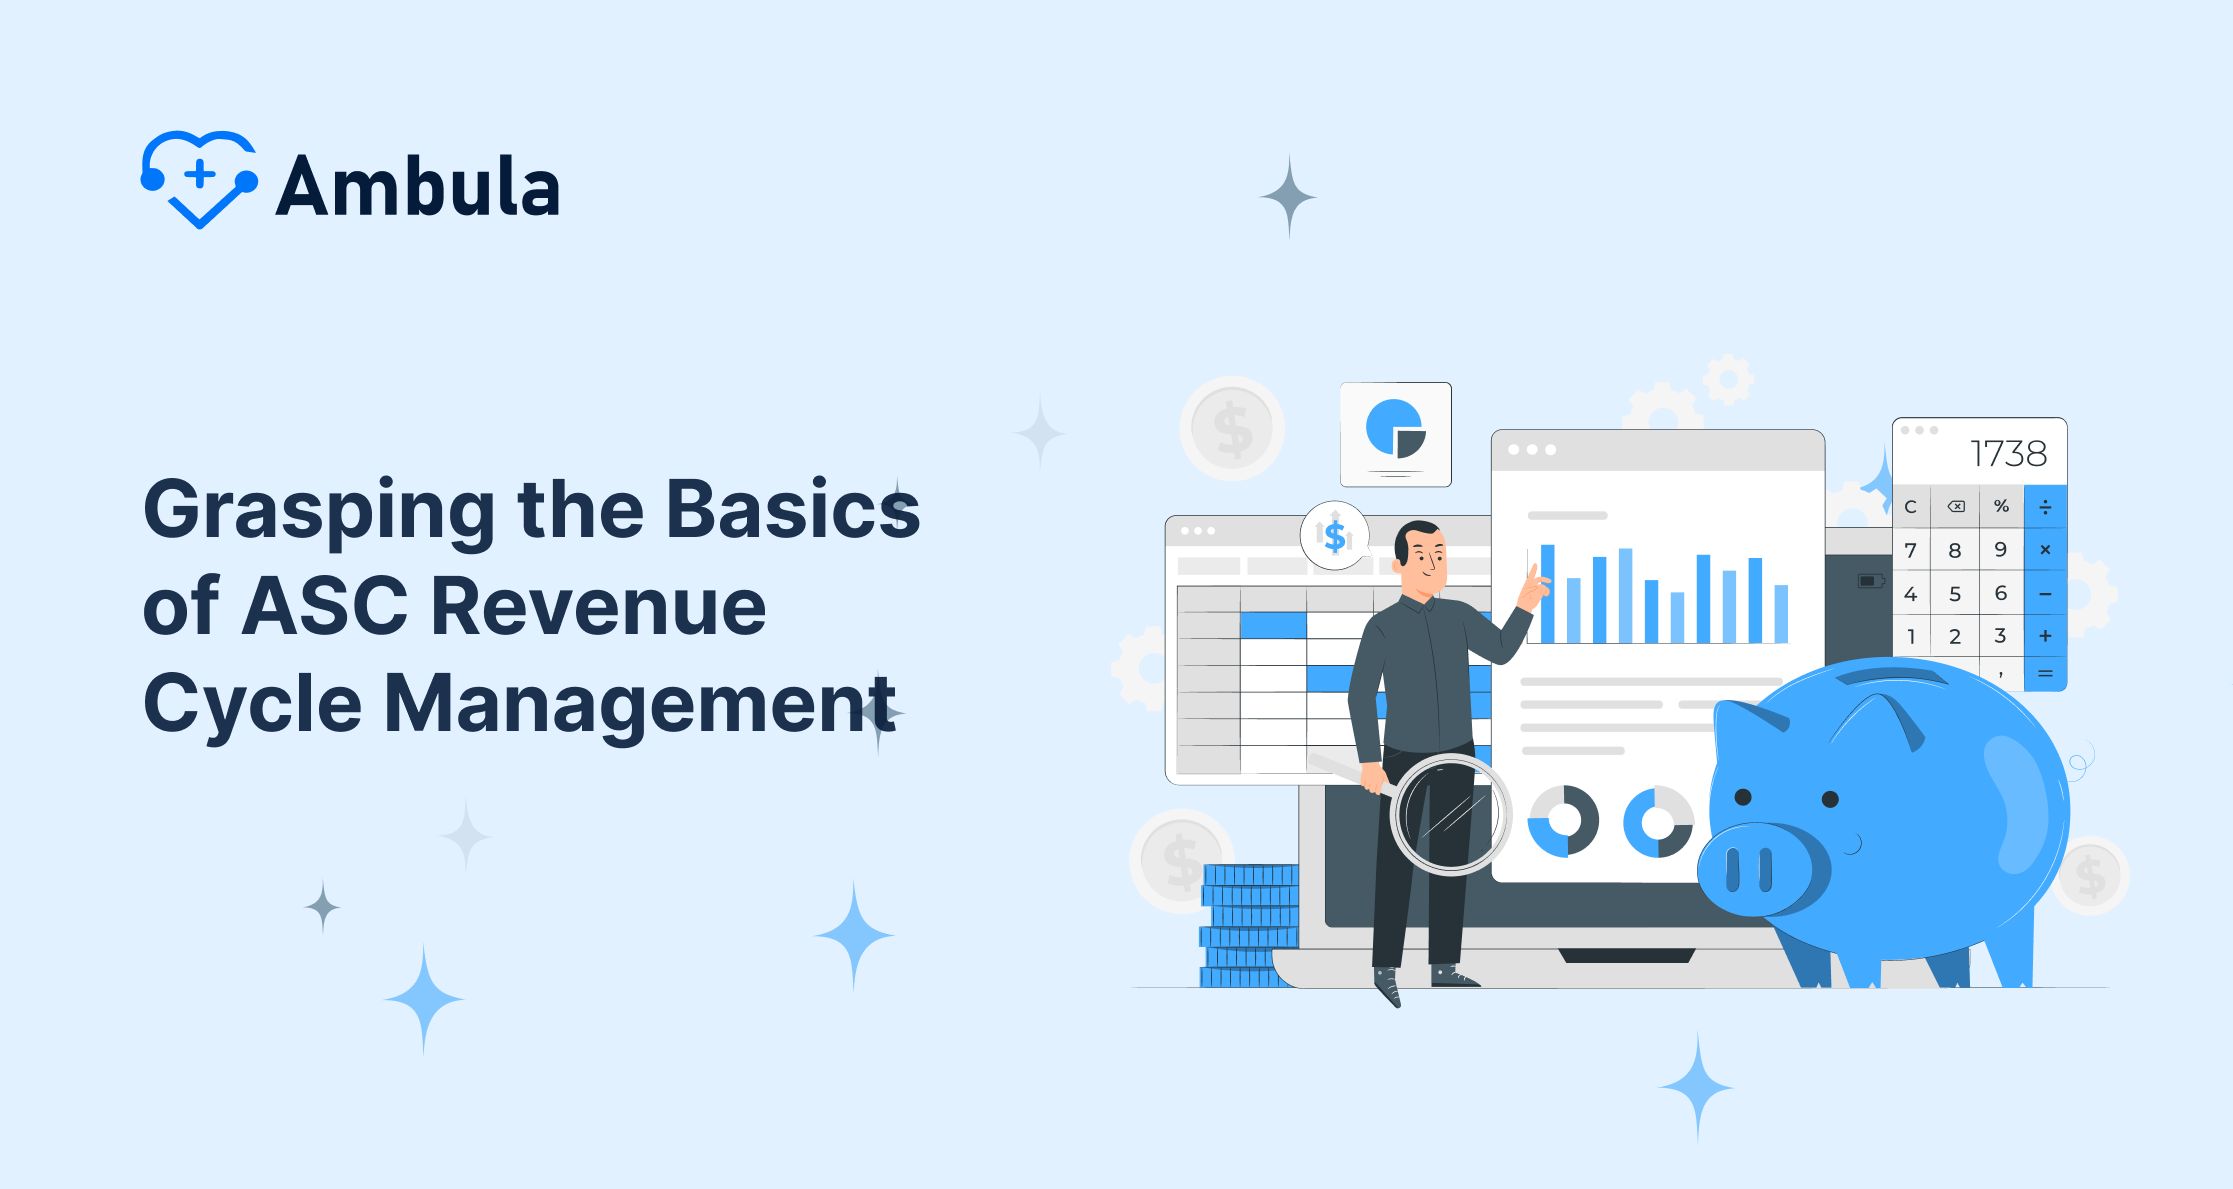 Grasping the Basics of ASC Revenue Cycle Management